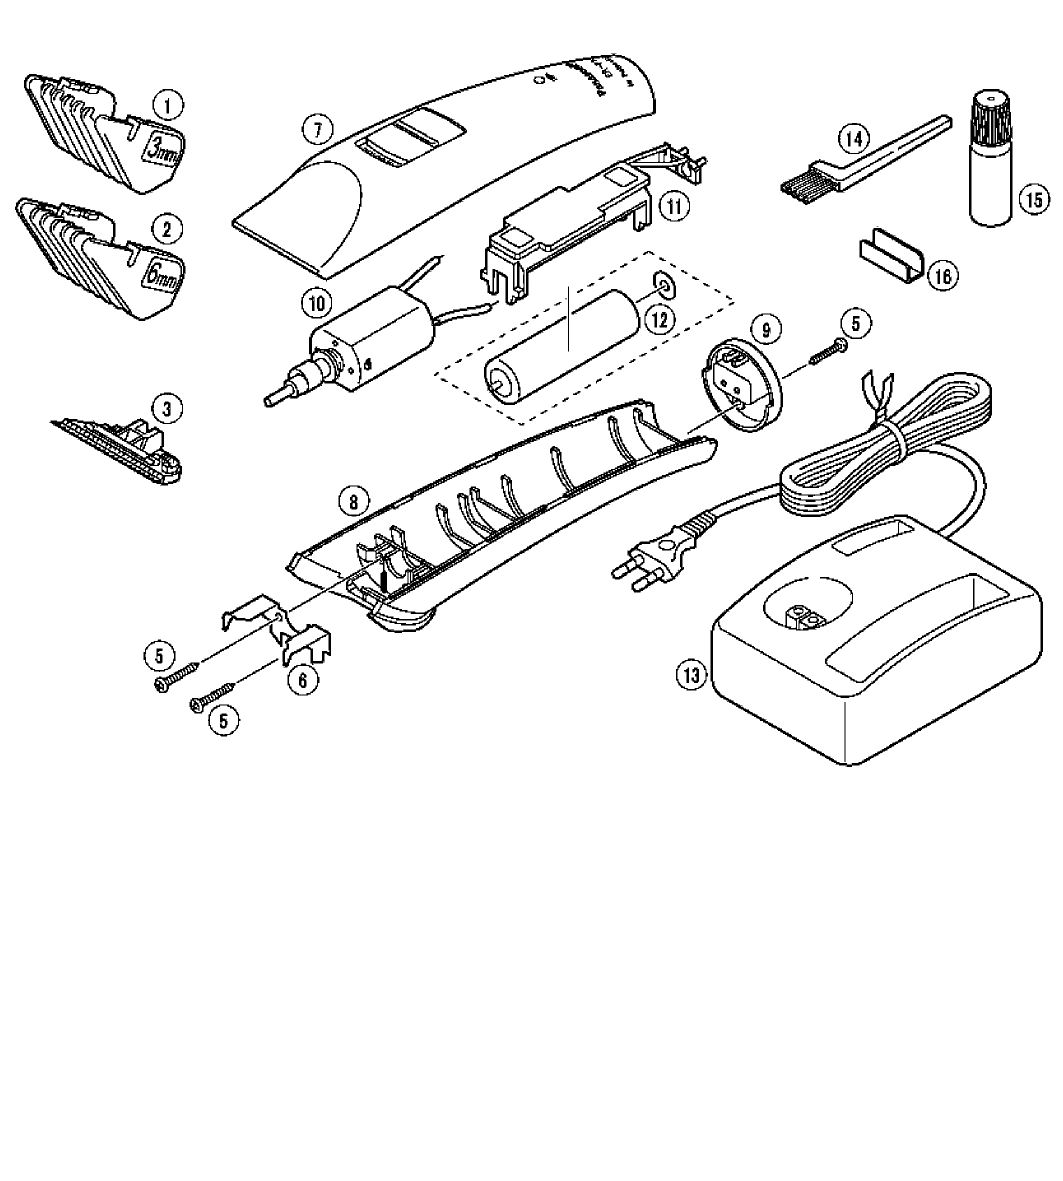 ER-PA10: Exploded View